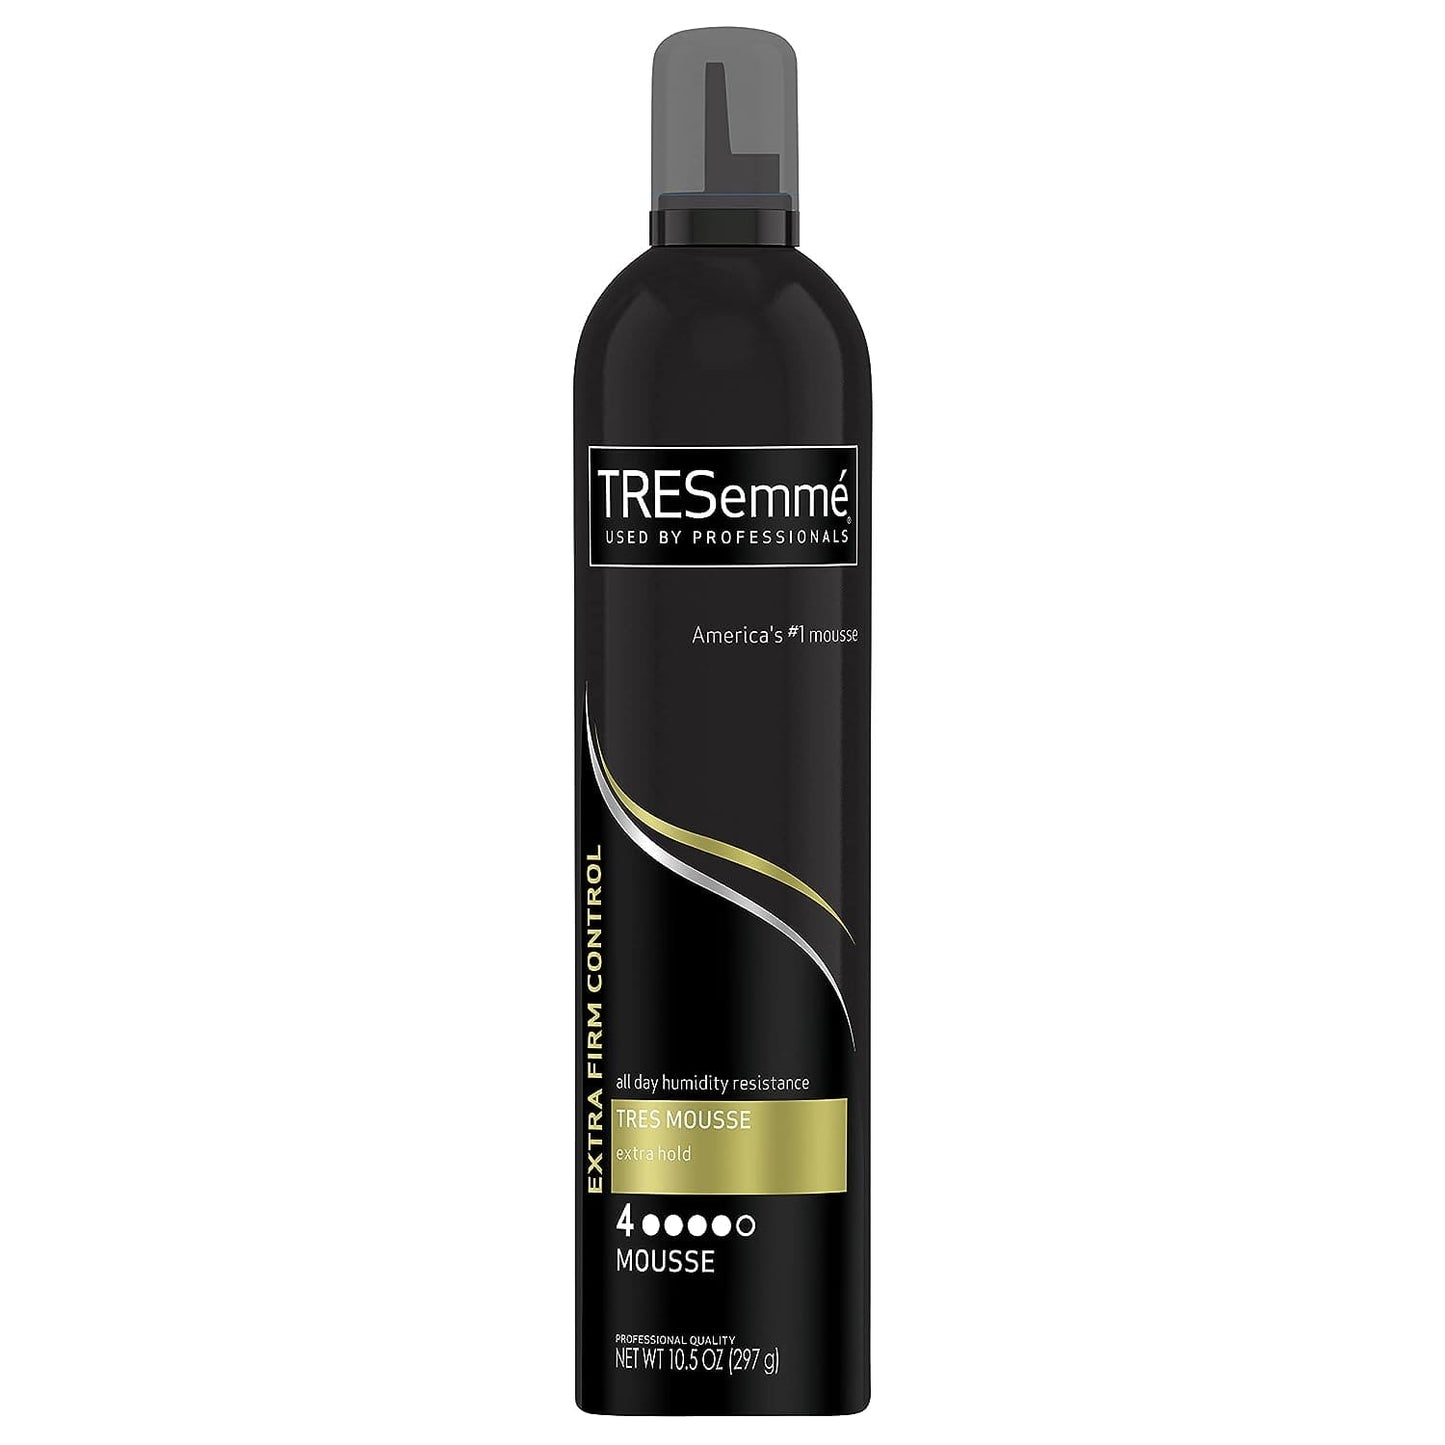 Tresemme Mousse Extra Firm Control  10.5oz